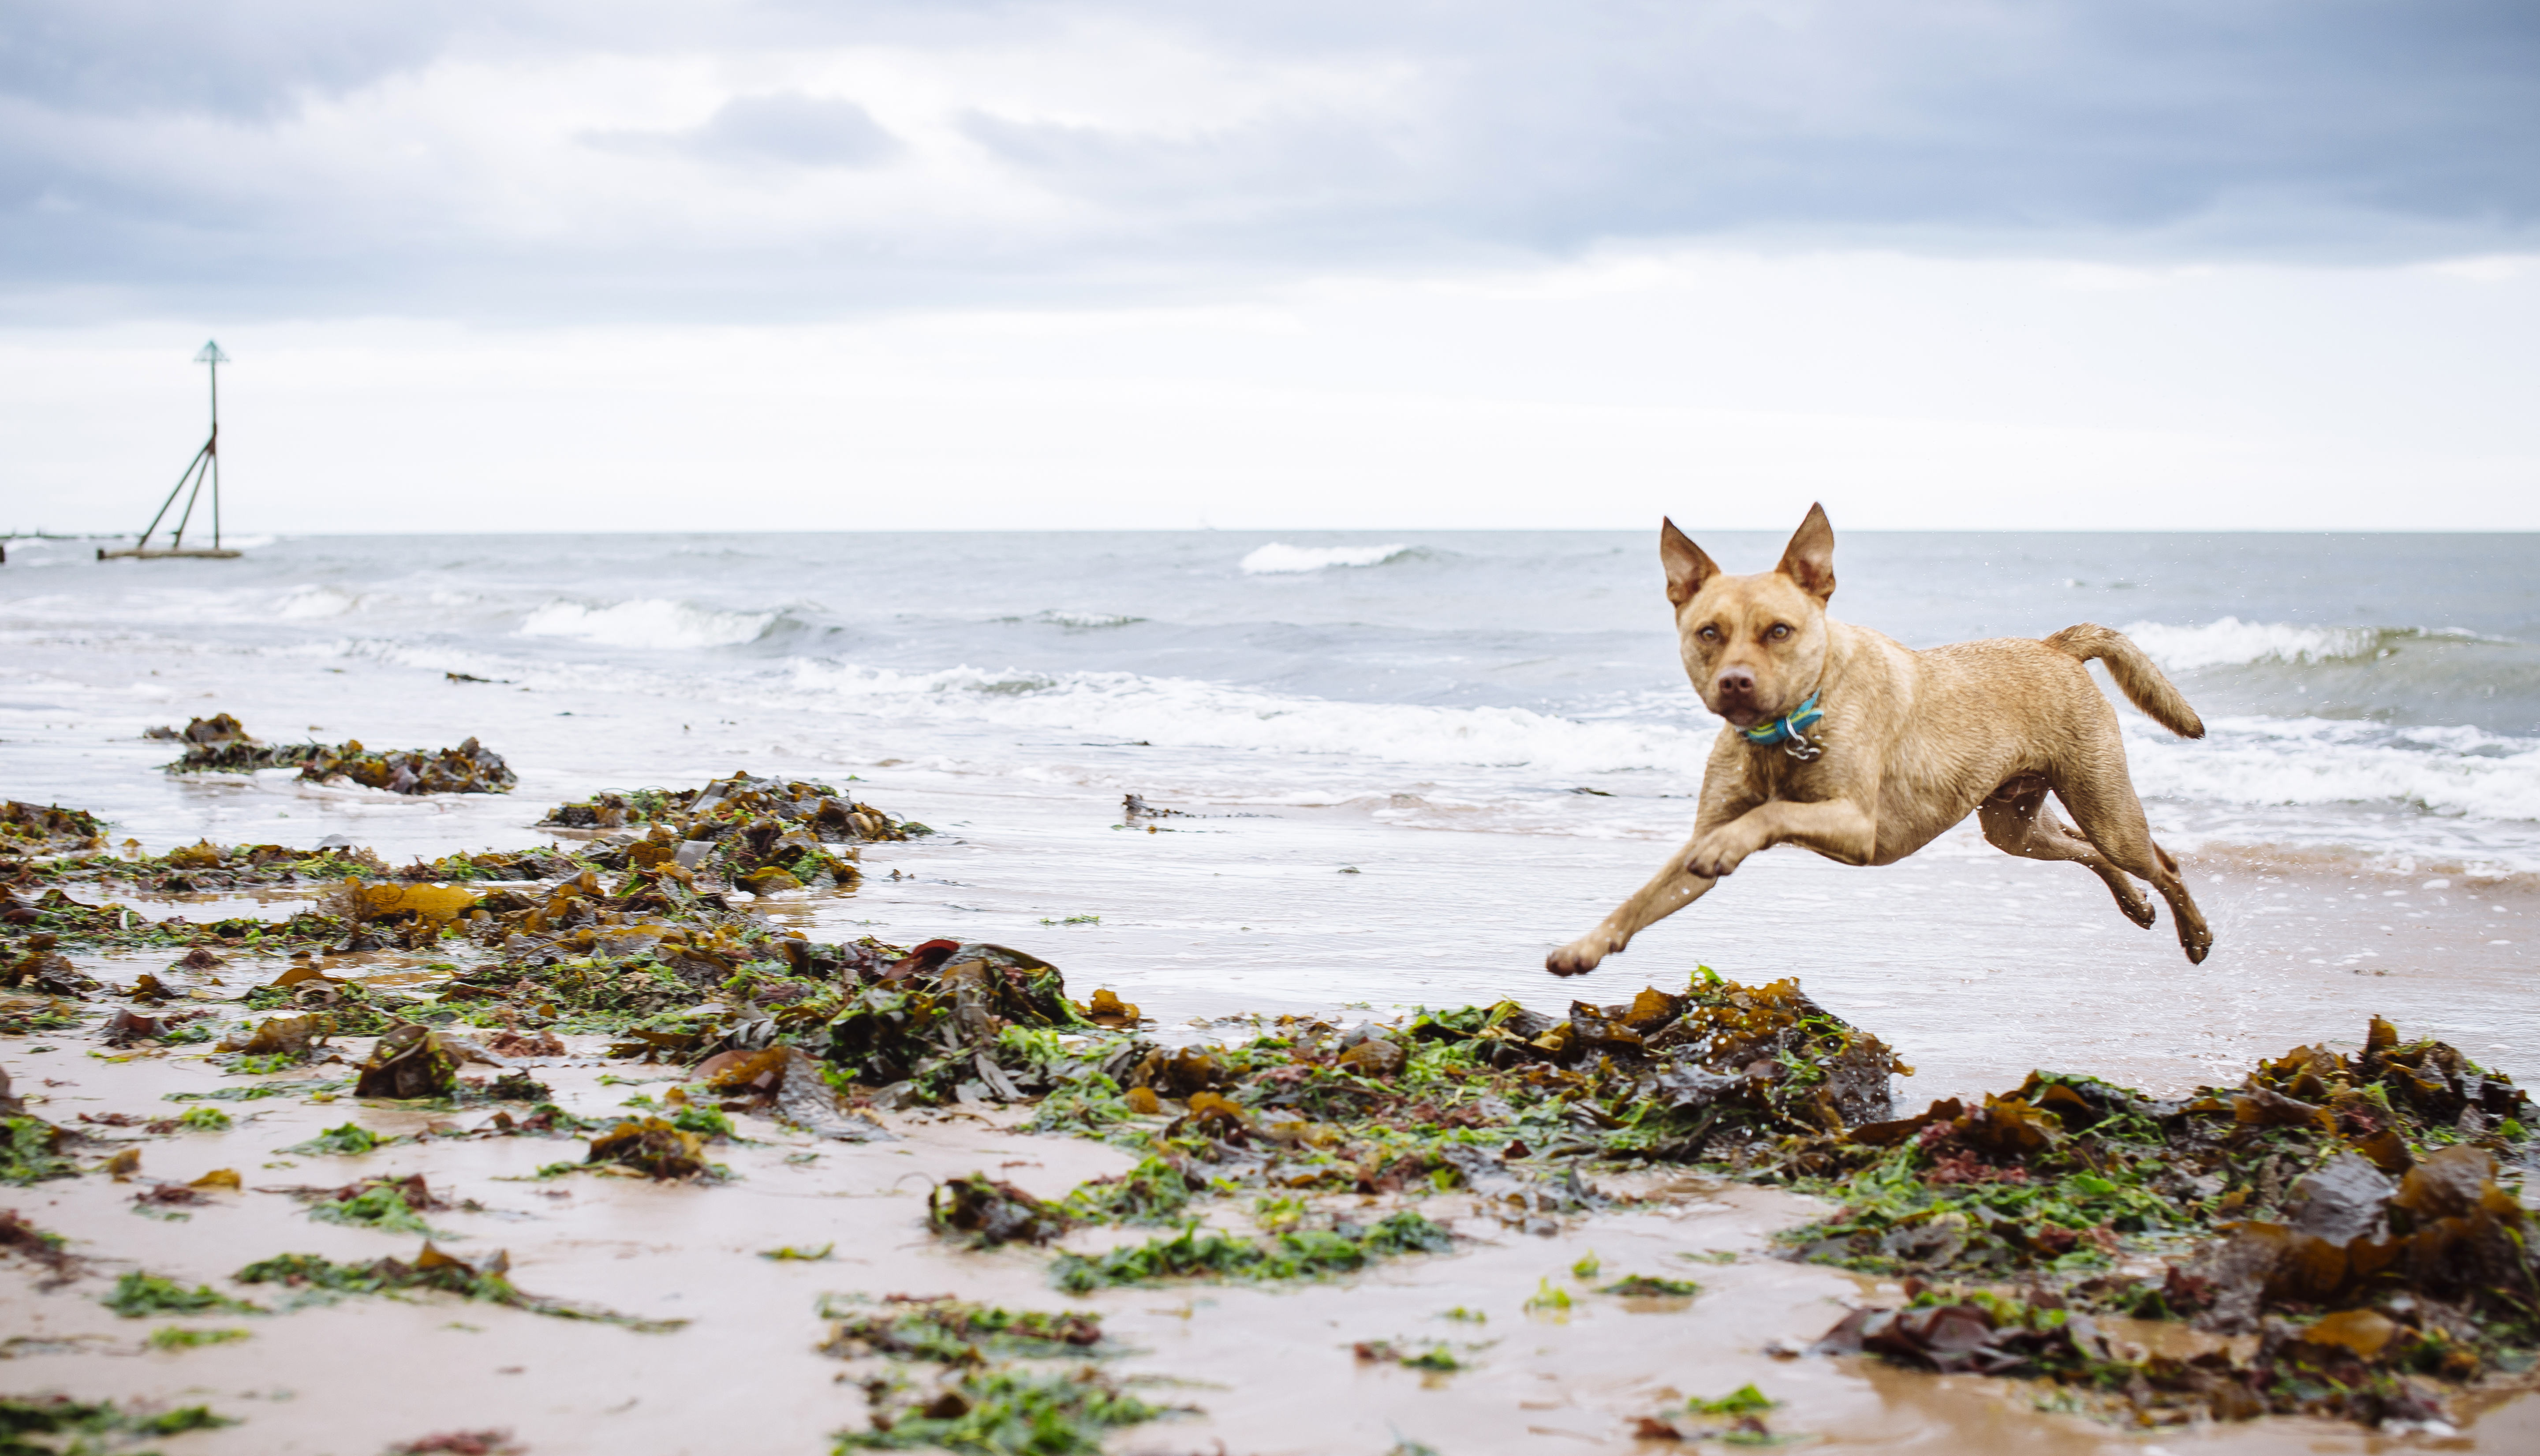 Tigger jumps for joy through the waves at the beach